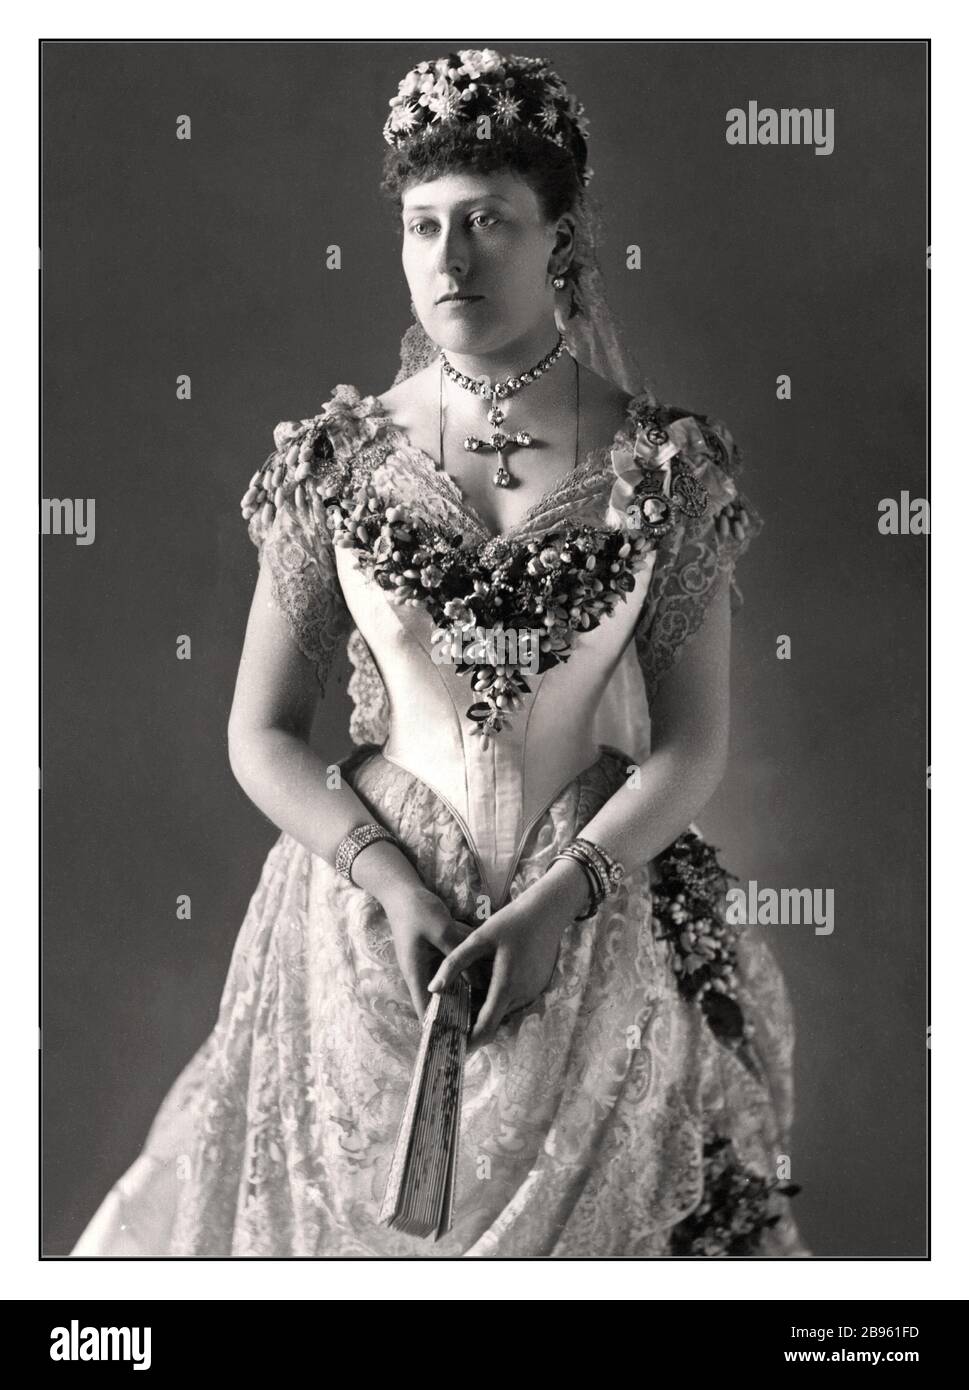 1800's Princess Beatrice of the United Kingdom, (Beatrice Mary Victoria Feodore; later Princess Henry of Battenberg; 14 April 1857 – 26 October 1944) was the fifth daughter and youngest child of Queen Victoria and Prince Albert. Beatrice was the last of Queen Victoria's children to die, 66 years after the first, her elder sister Alice. Stock Photo